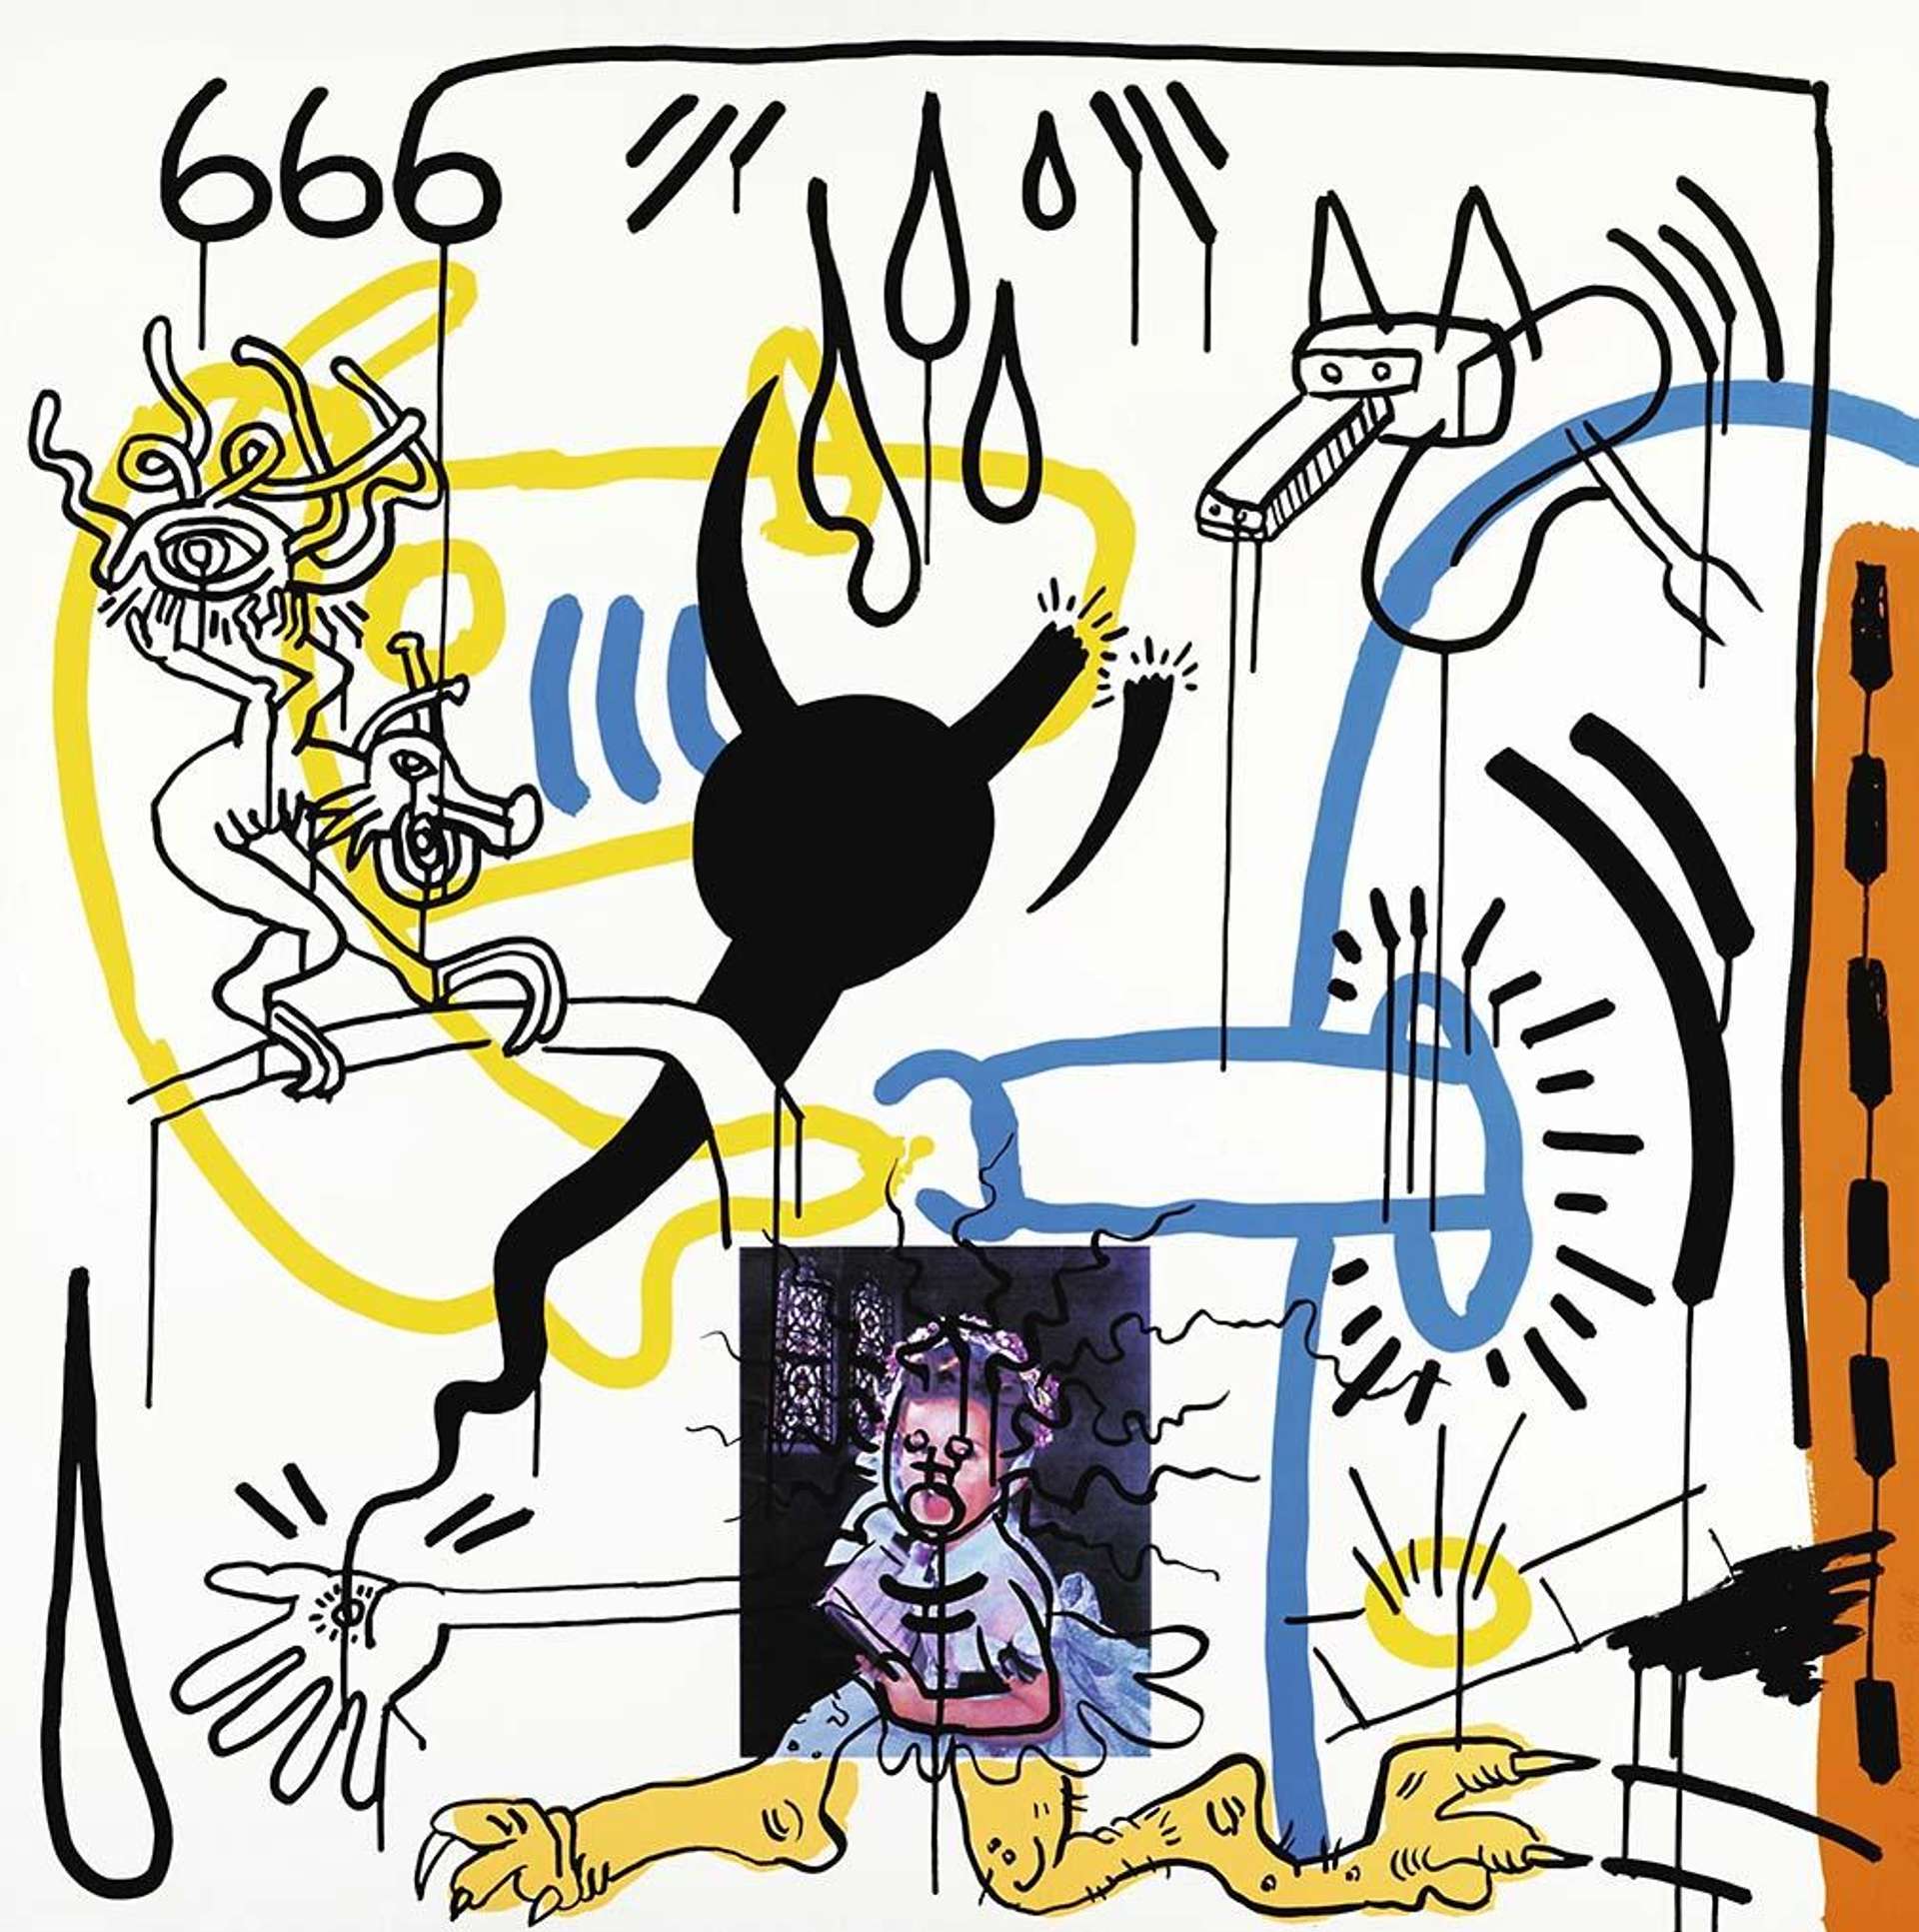 Keith Haring’s Apocalypse 8. A Pop Art screenprint collage featuring photography and animated dream-like figures. 